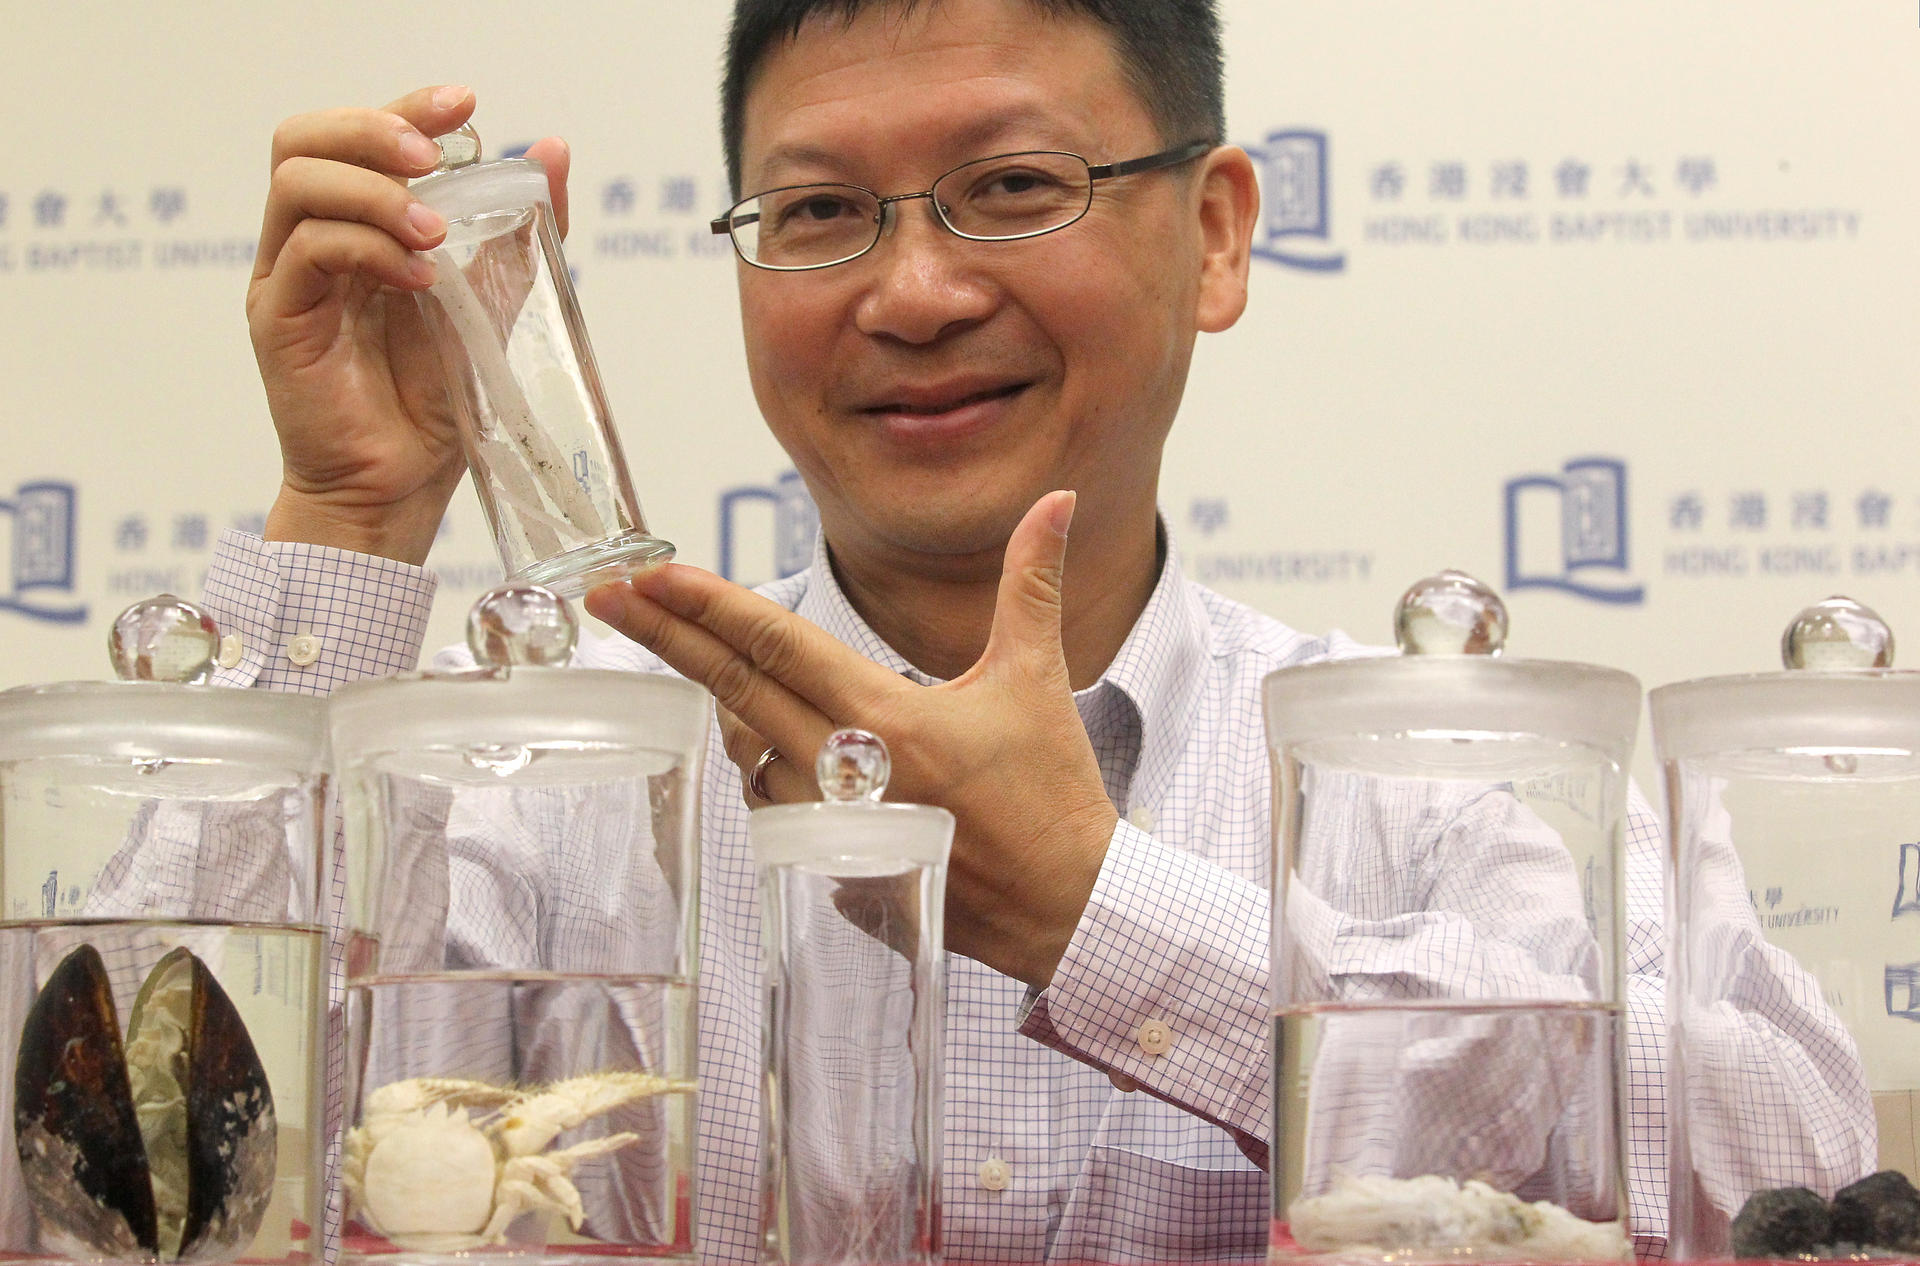 Qiu Jianwen with some of the specimens he found at the bottom of the South China Sea. Photo: K. Y. Cheng